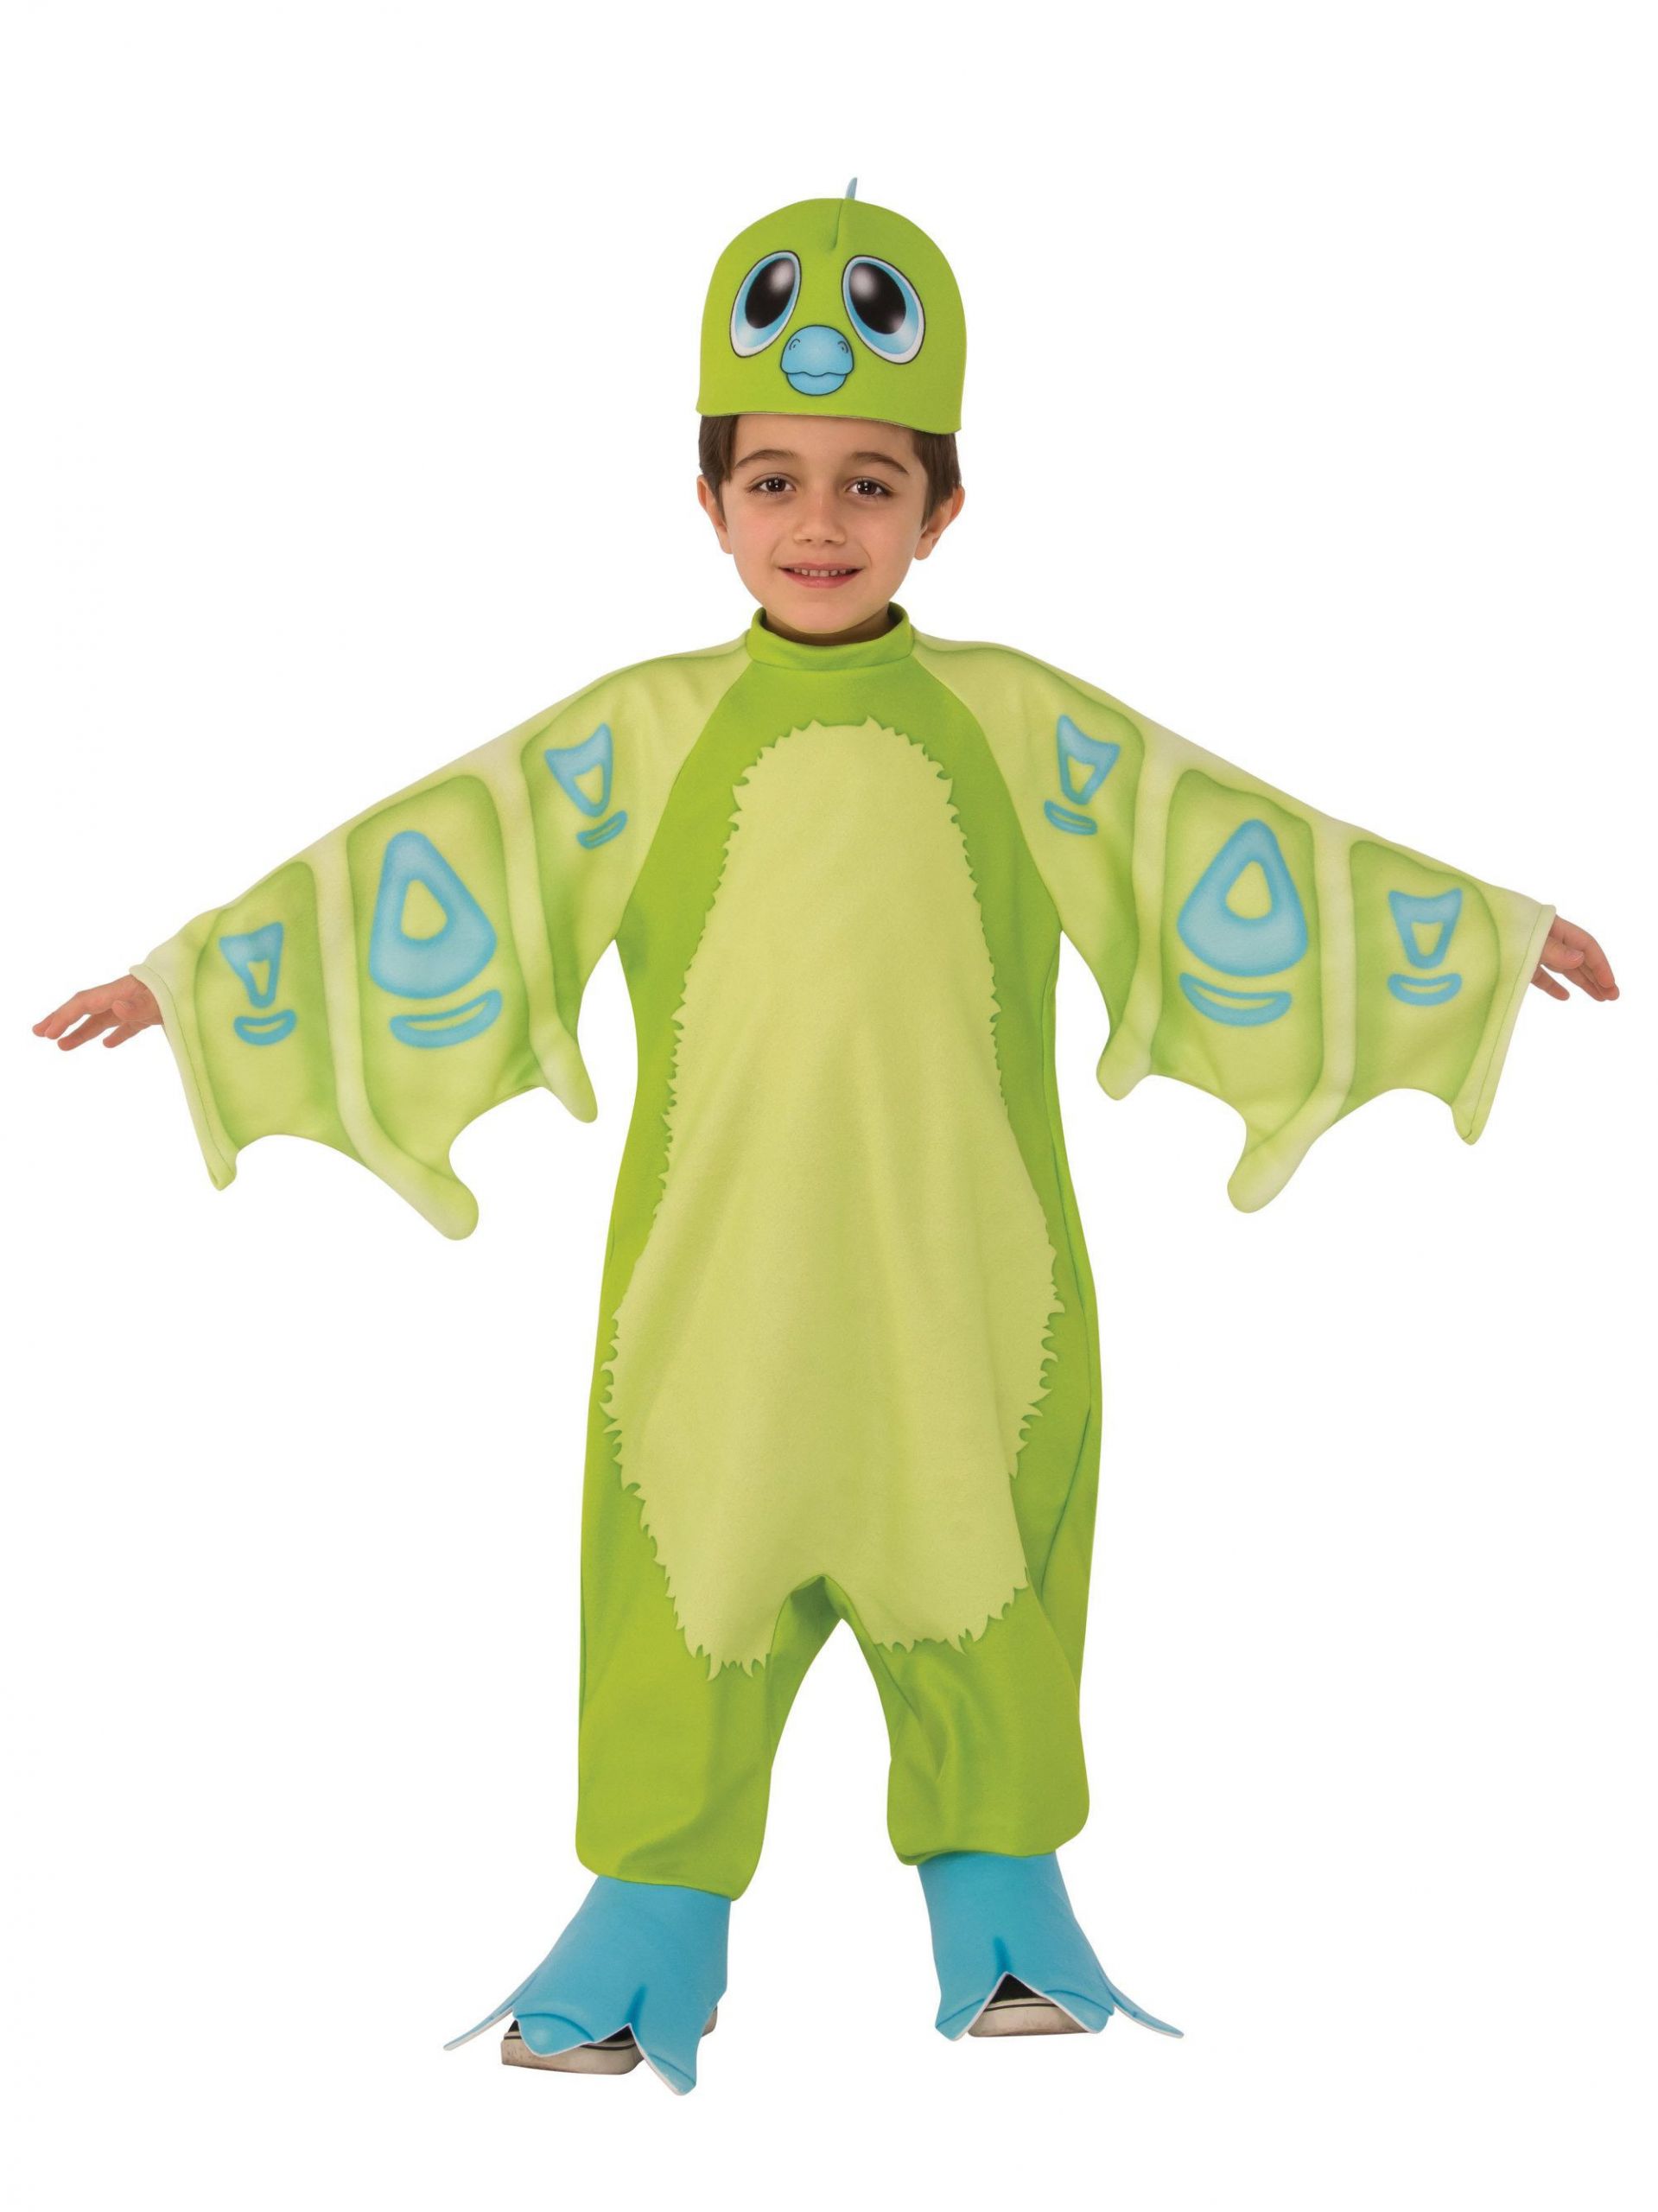 Wholesale Halloween Costume &amp; Party Supplies
 Draggles Hatchimal Green Child Costume Boys Costumes